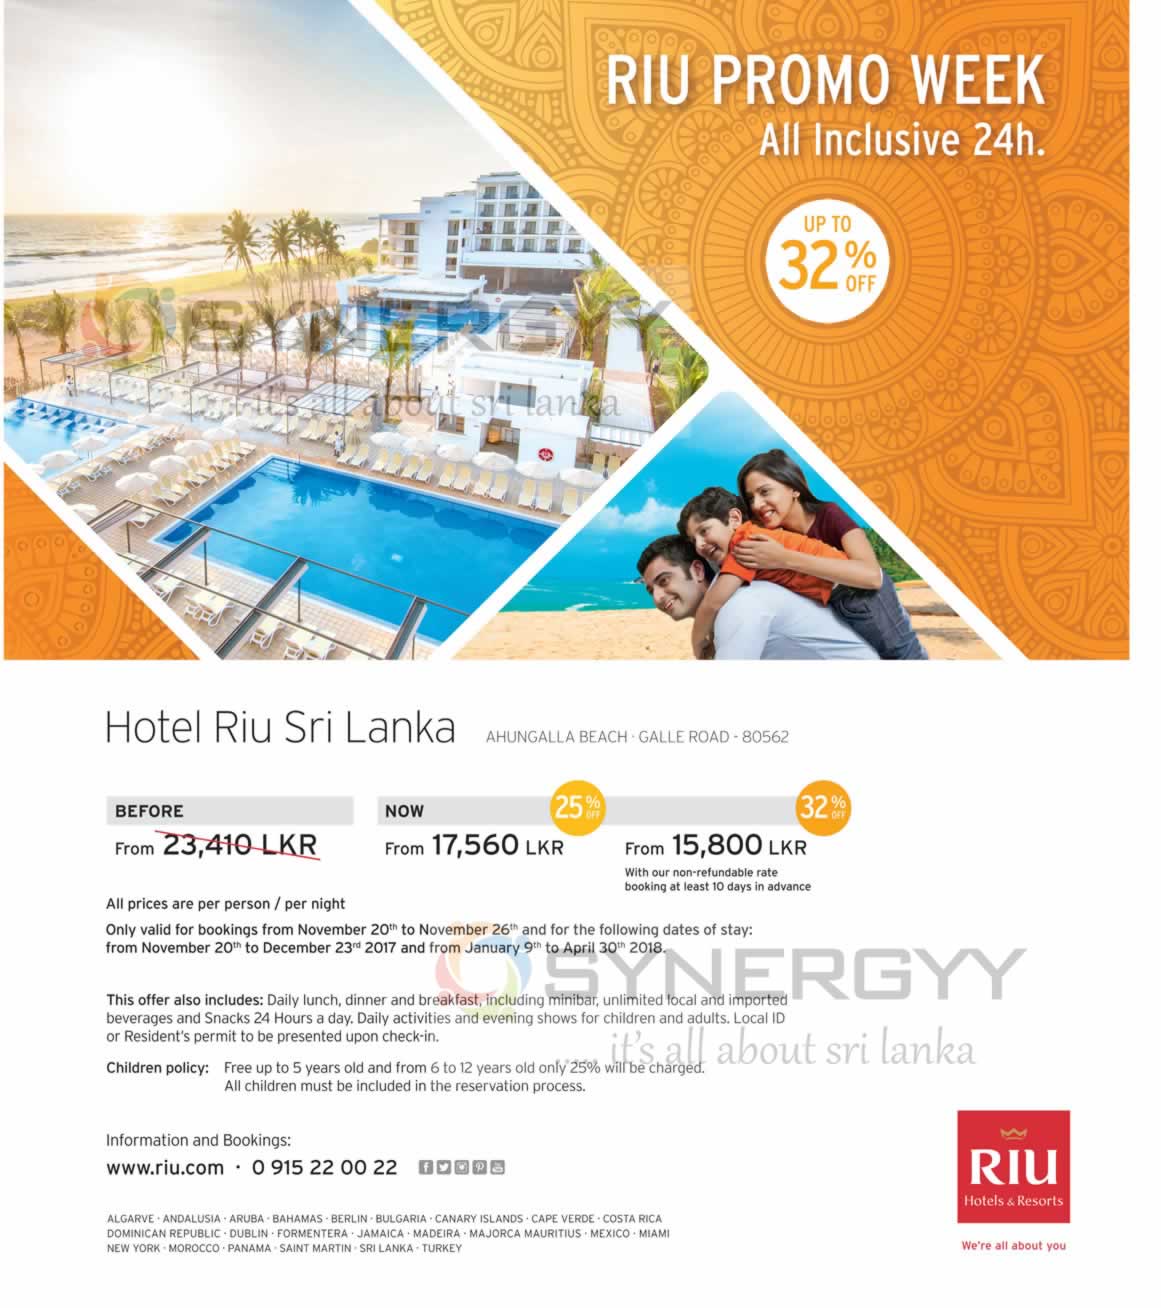 RIU Promo Week 207 Discount up to 32 SynergyY